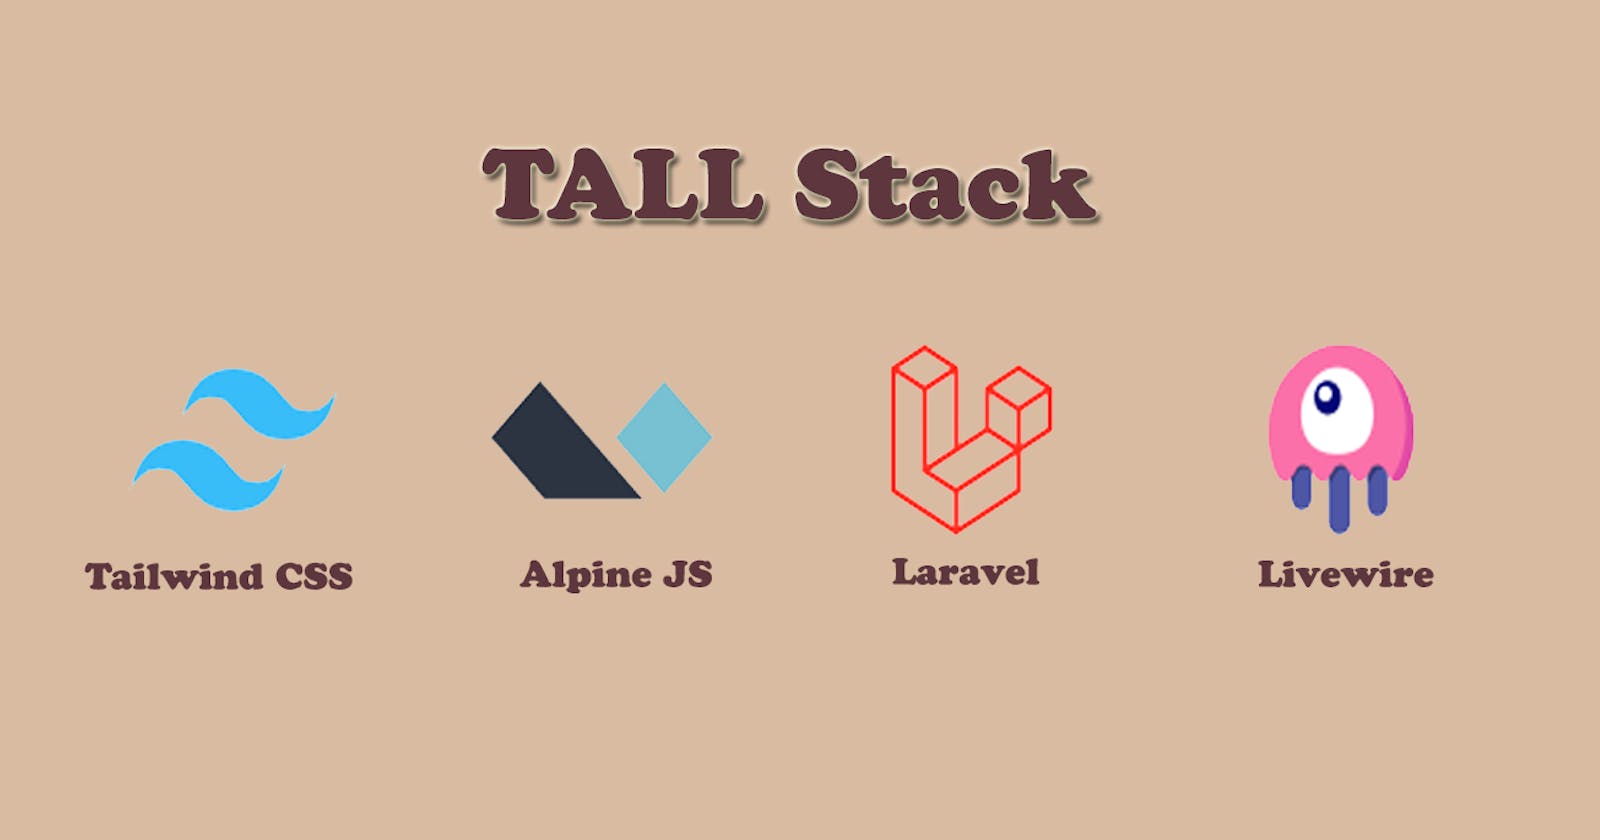 You should be aware of TALL Stack and it’s resources